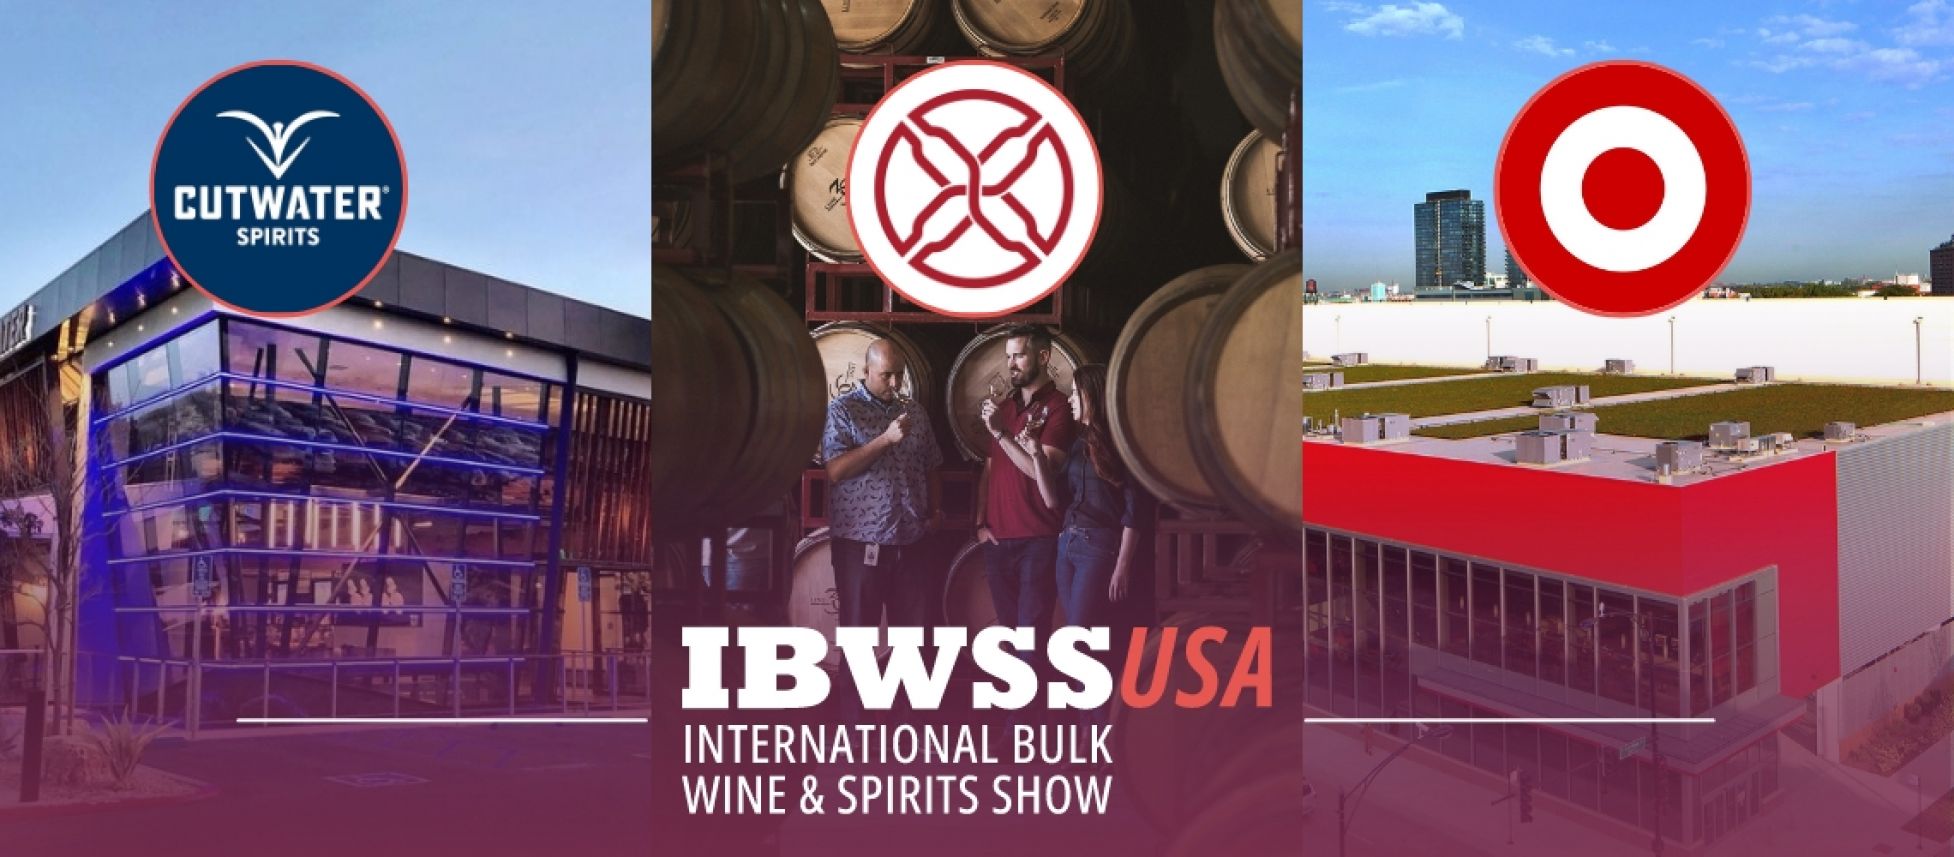 Photo for: Vintage Wine Estates, The Wine Group, Cutwater Spirits, Target & More To Be At IBWSS Conference